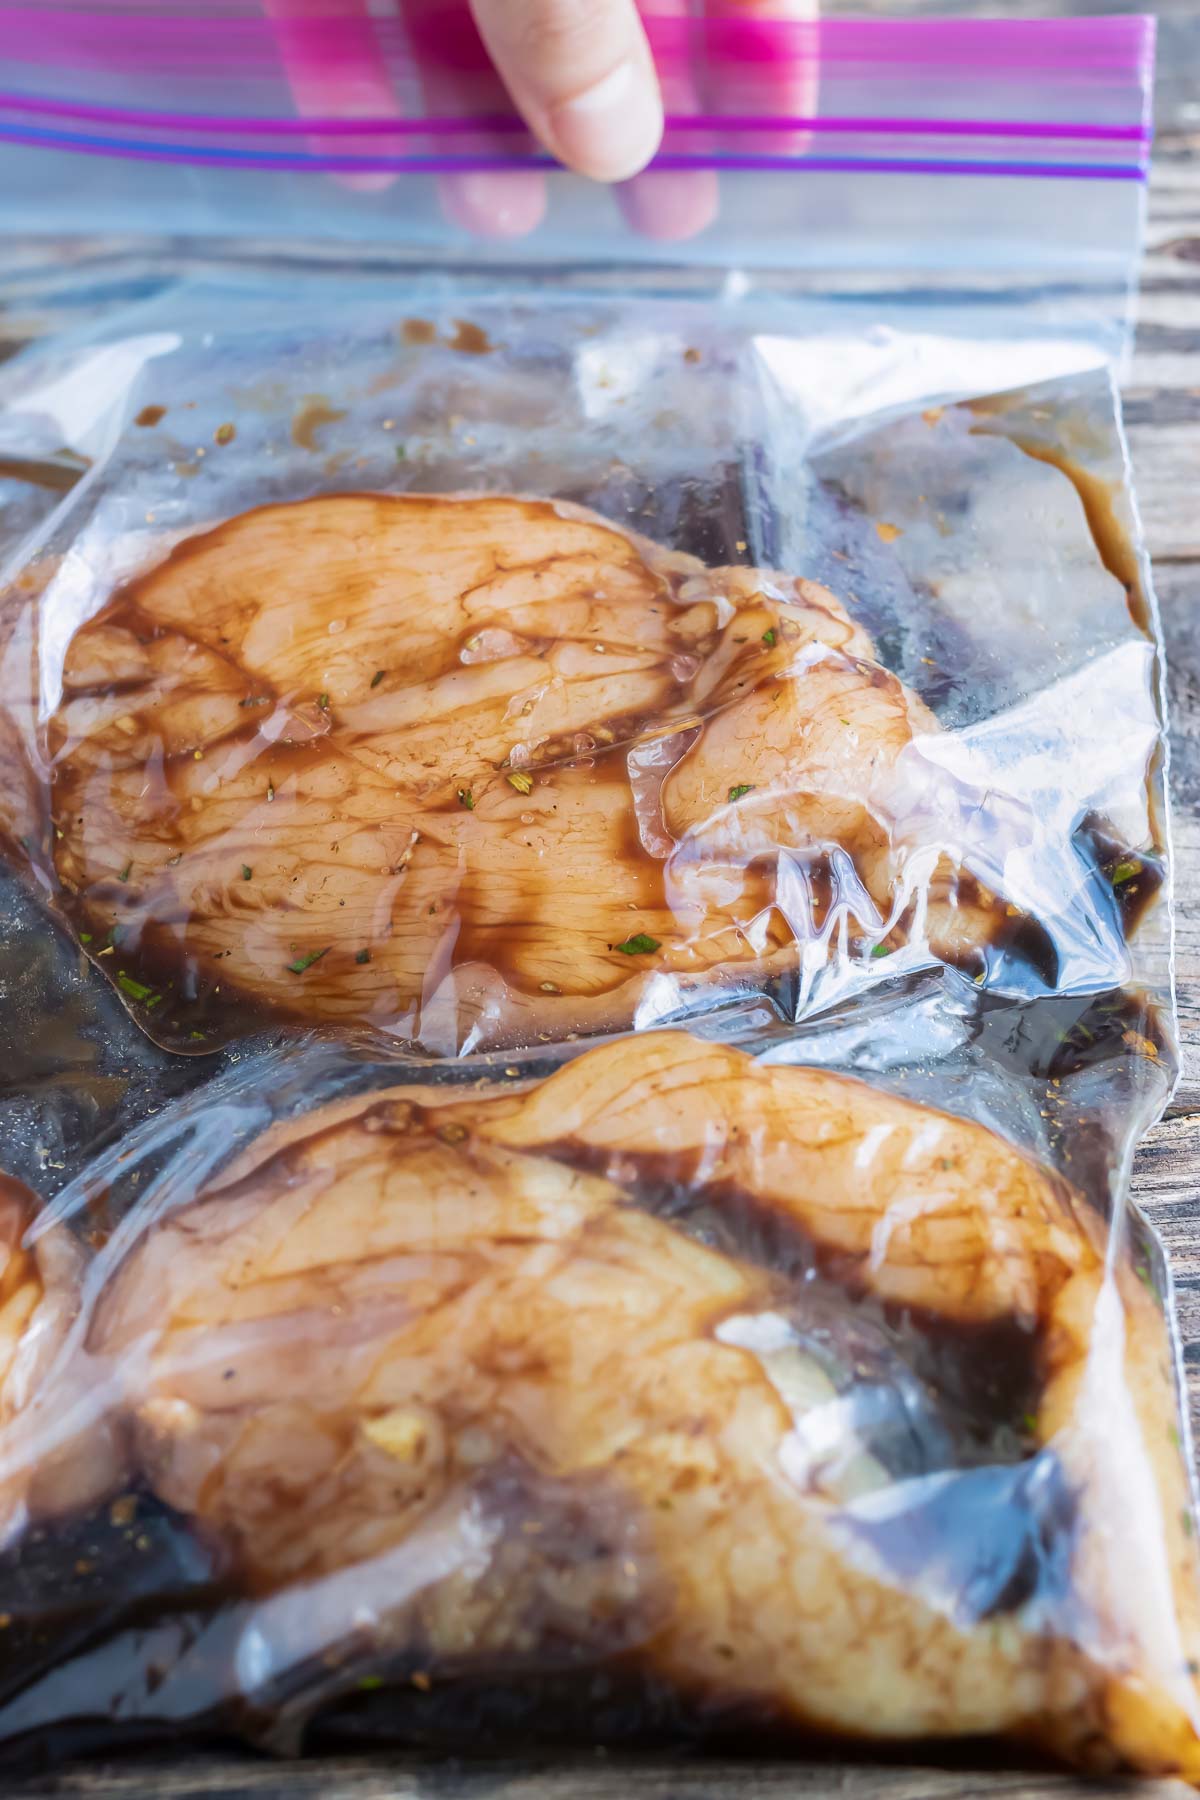 Chicken breasts soaking in a balsamic marinade before cooking.